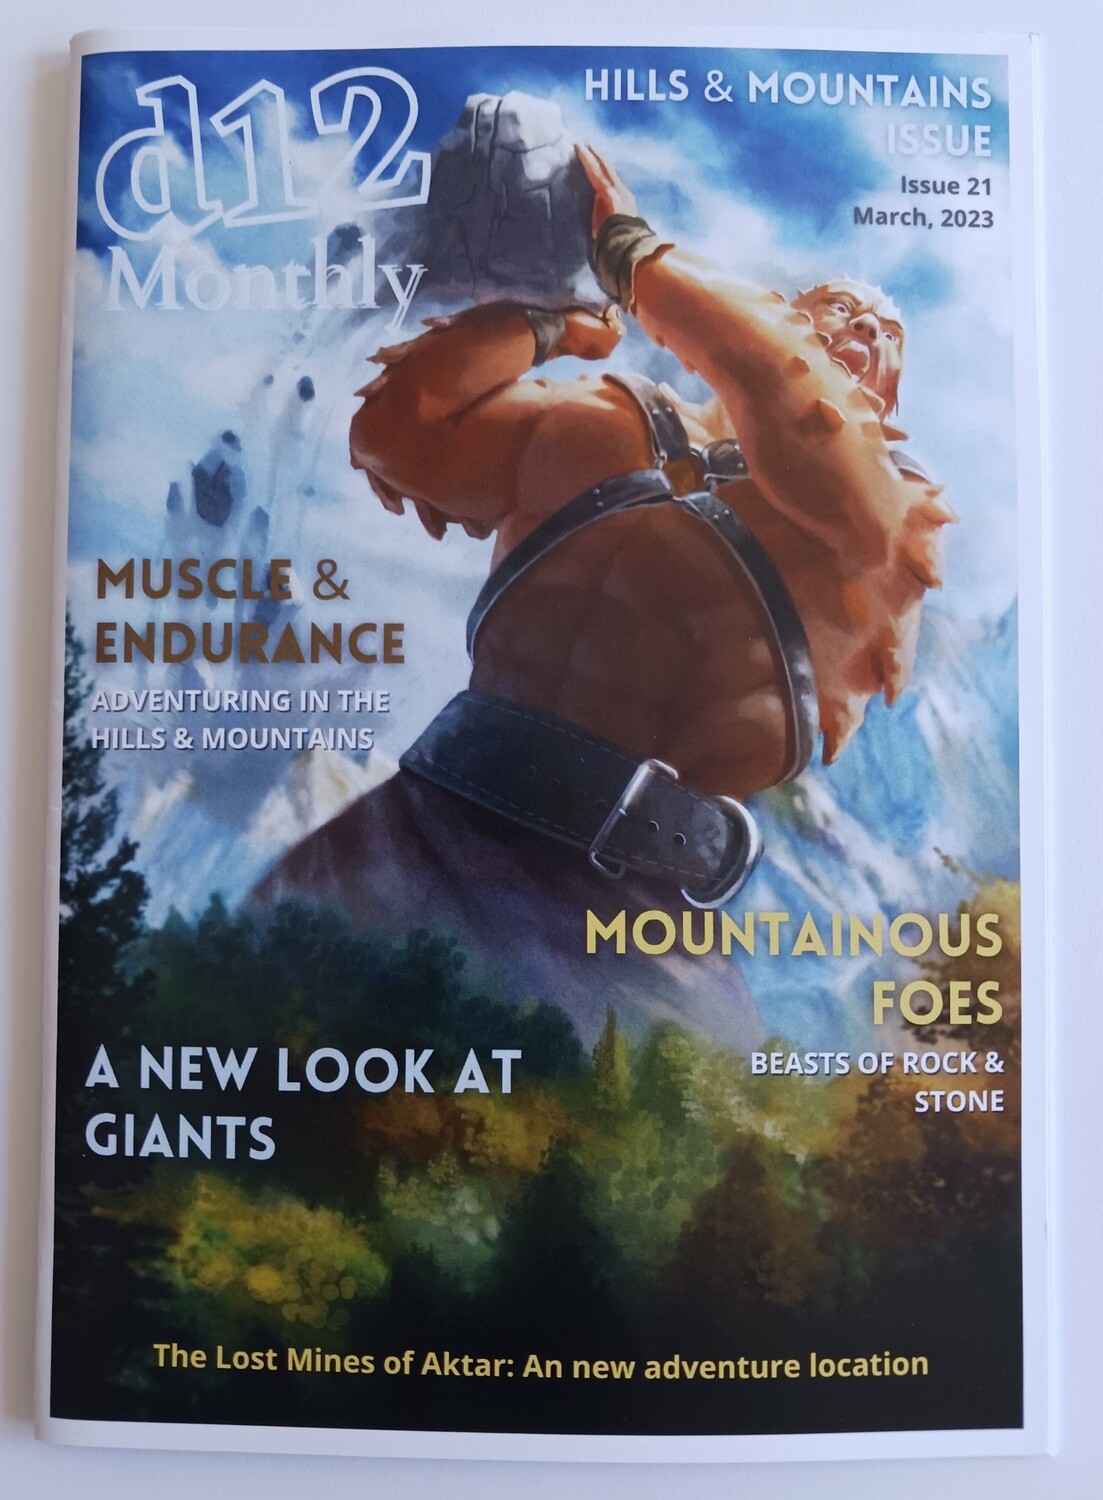 d12 Monthly Zine - Issue 21 (Hills And Mountains)